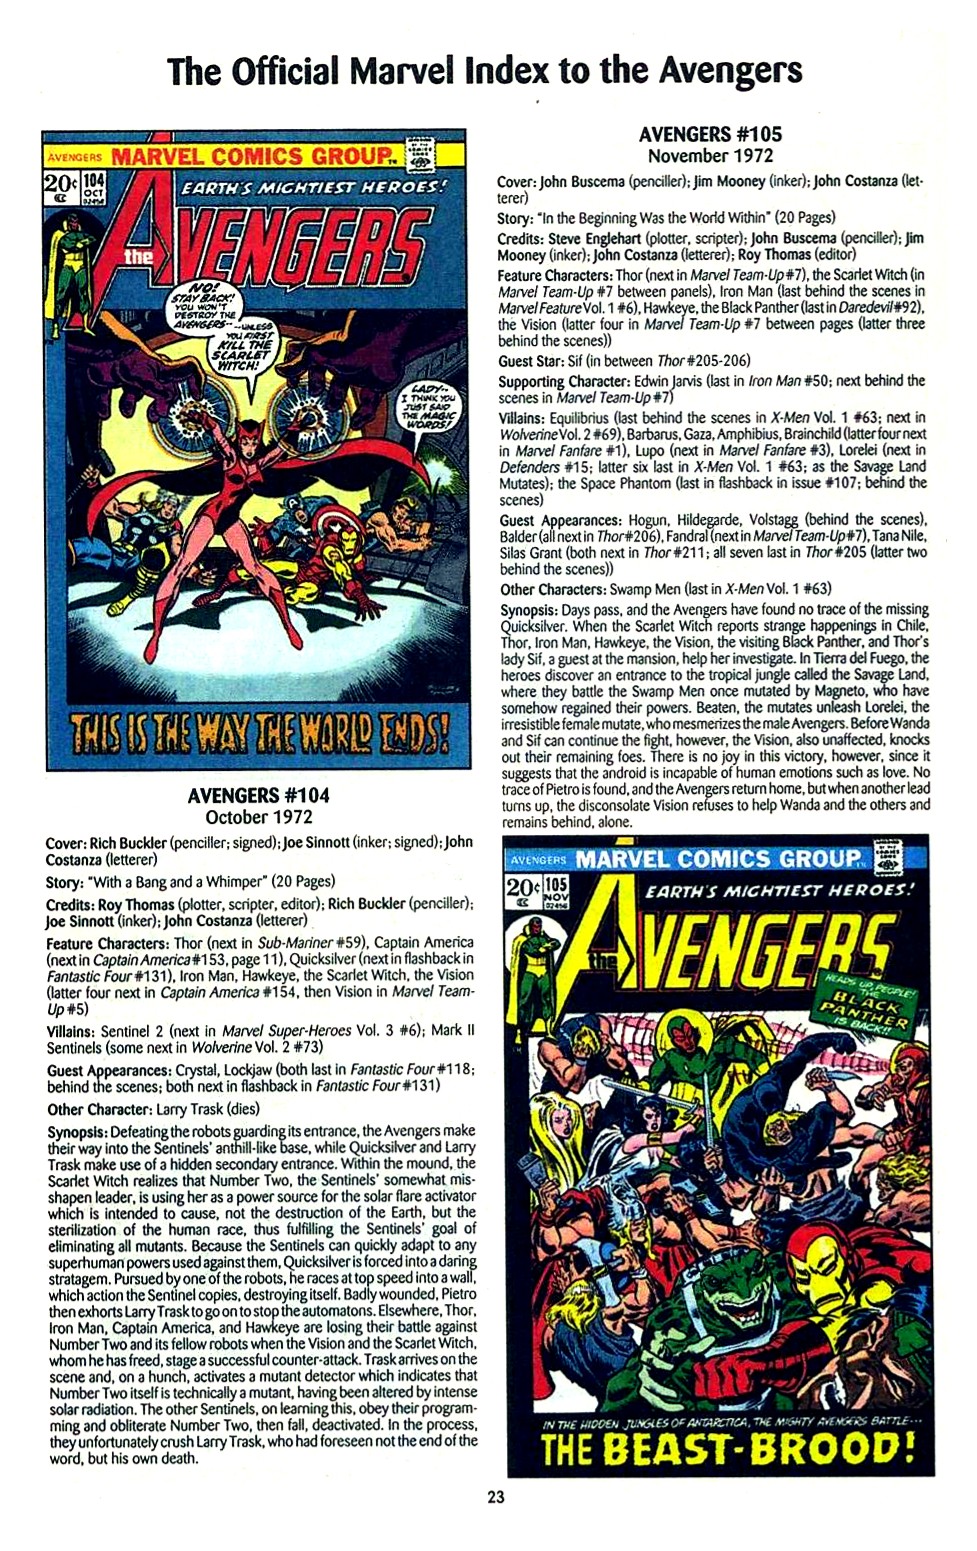 Read online The Official Marvel Index to the Avengers comic -  Issue #2 - 25